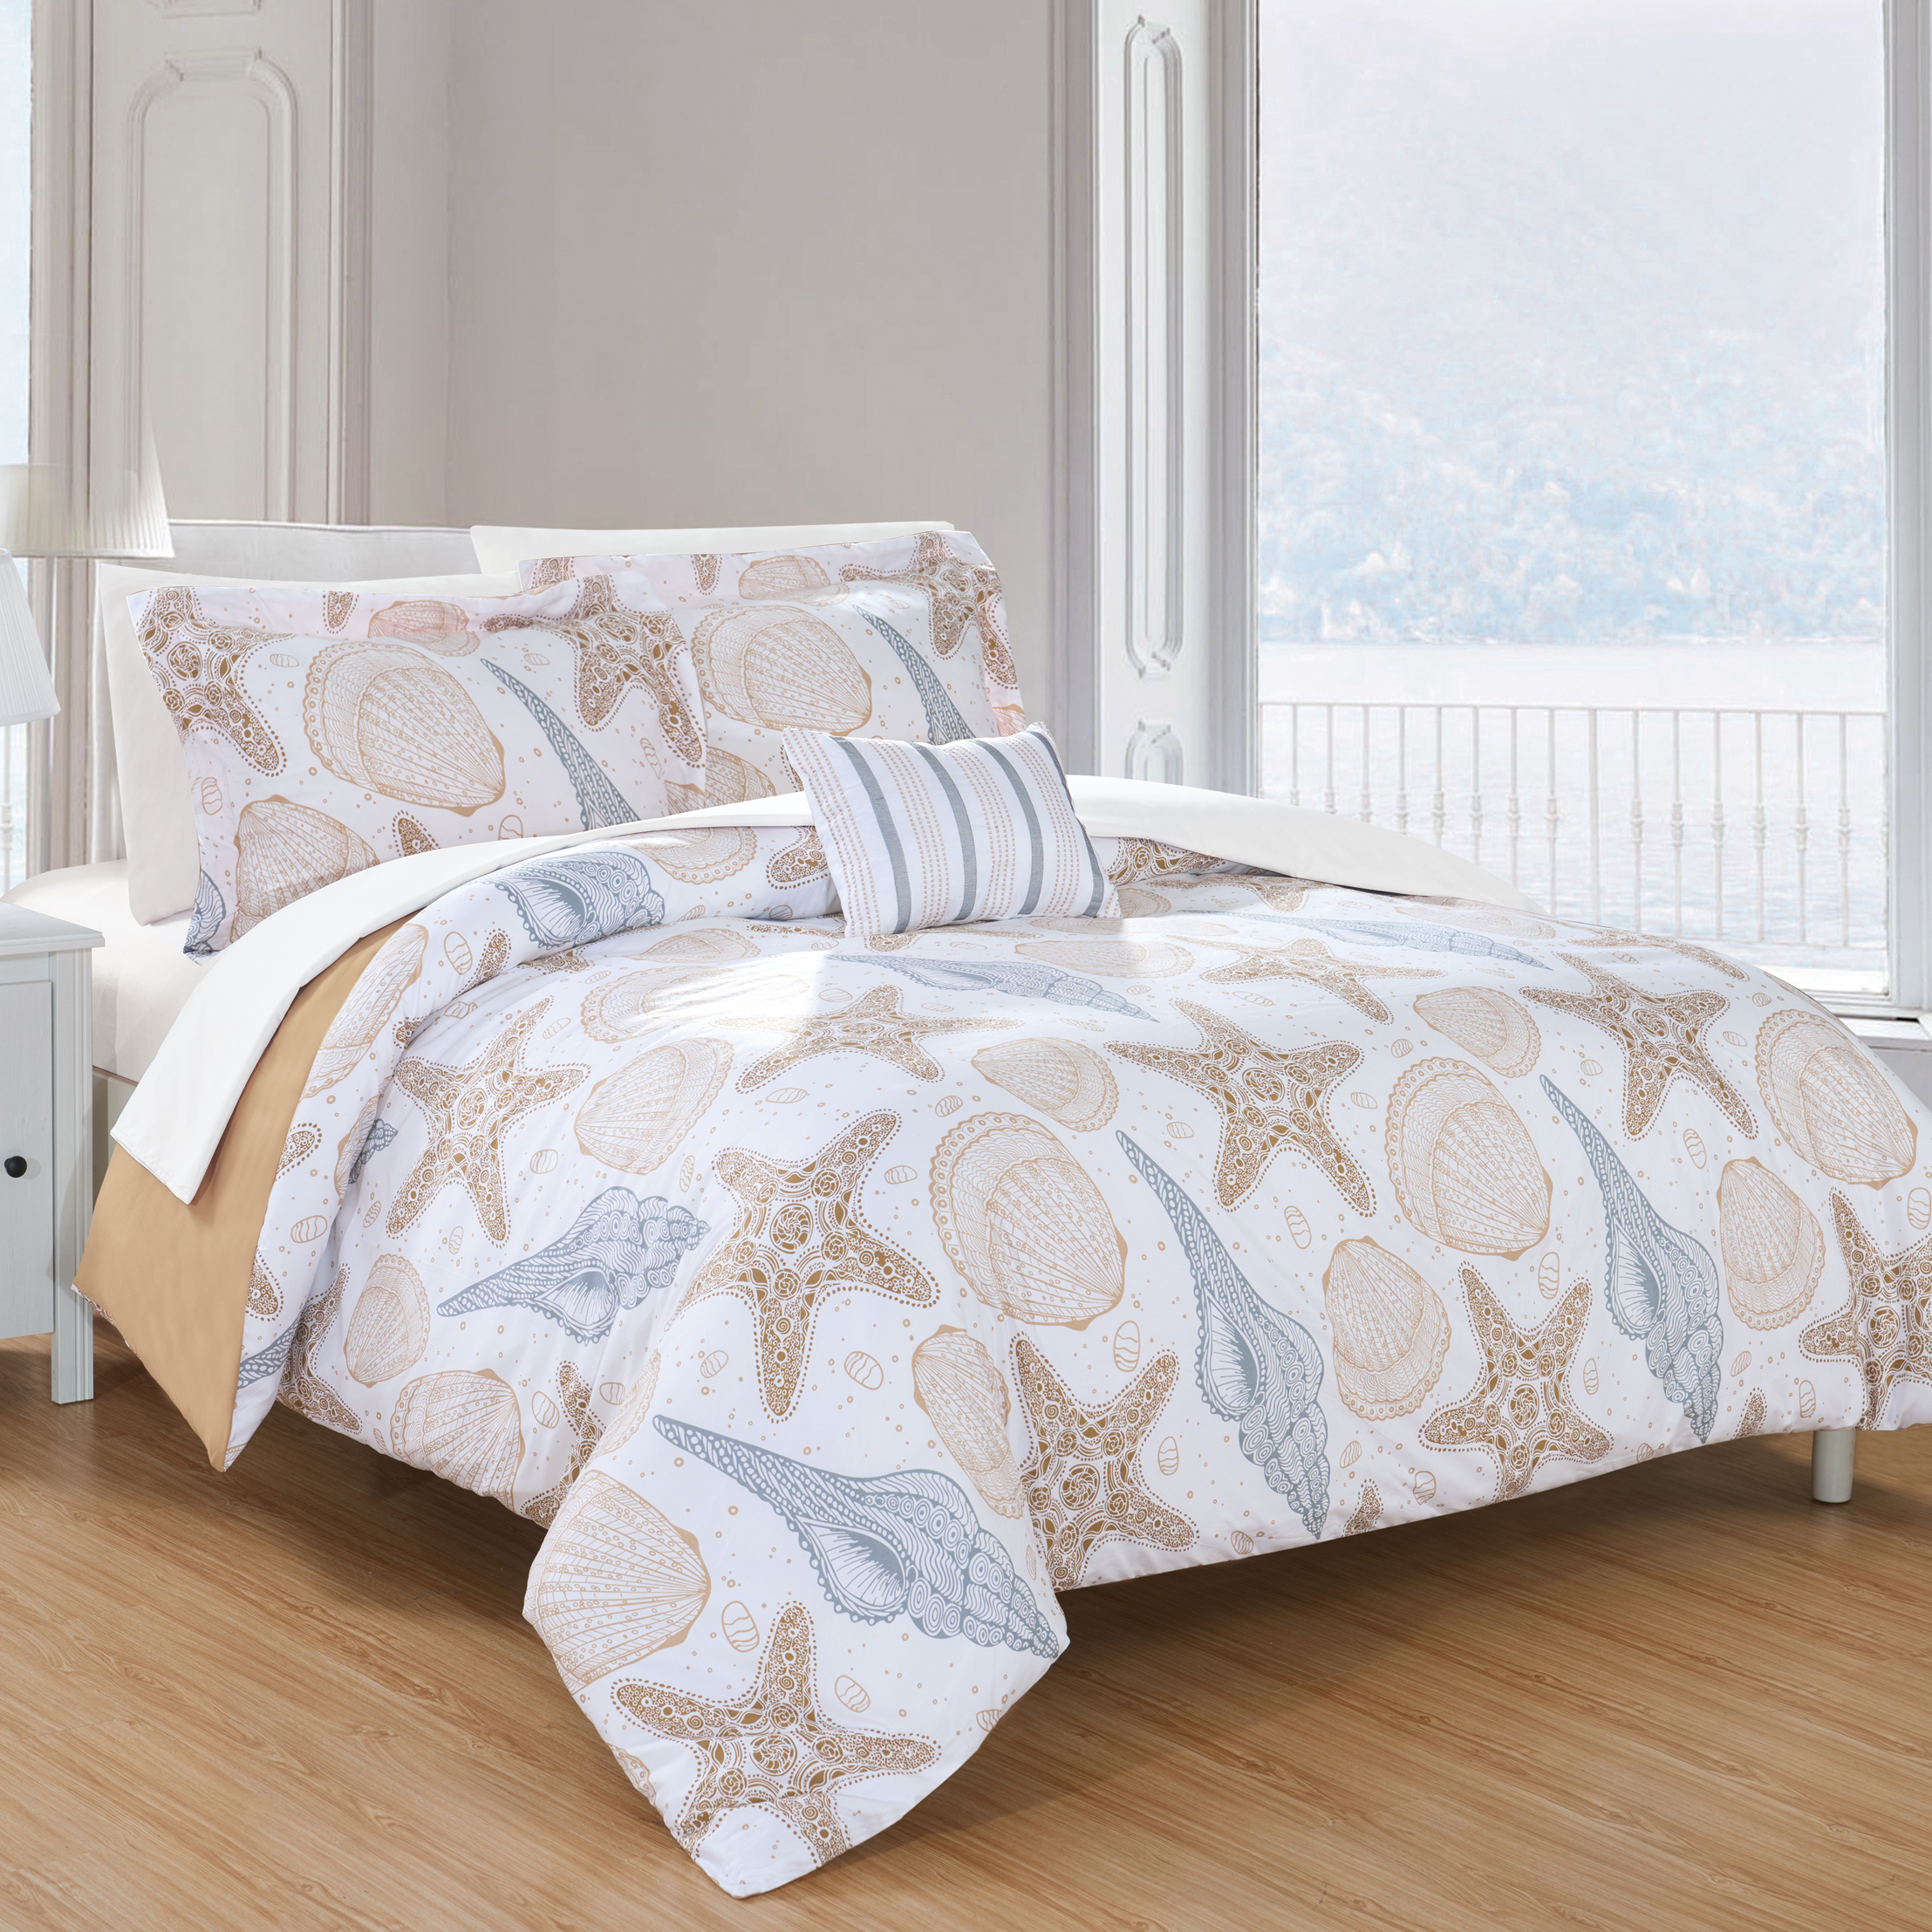 Candace 4 Or 3 Piece Reversible Duvet Cover Set Sea, Sand, Surf Theme Print Design Bedding - Brown, Twin